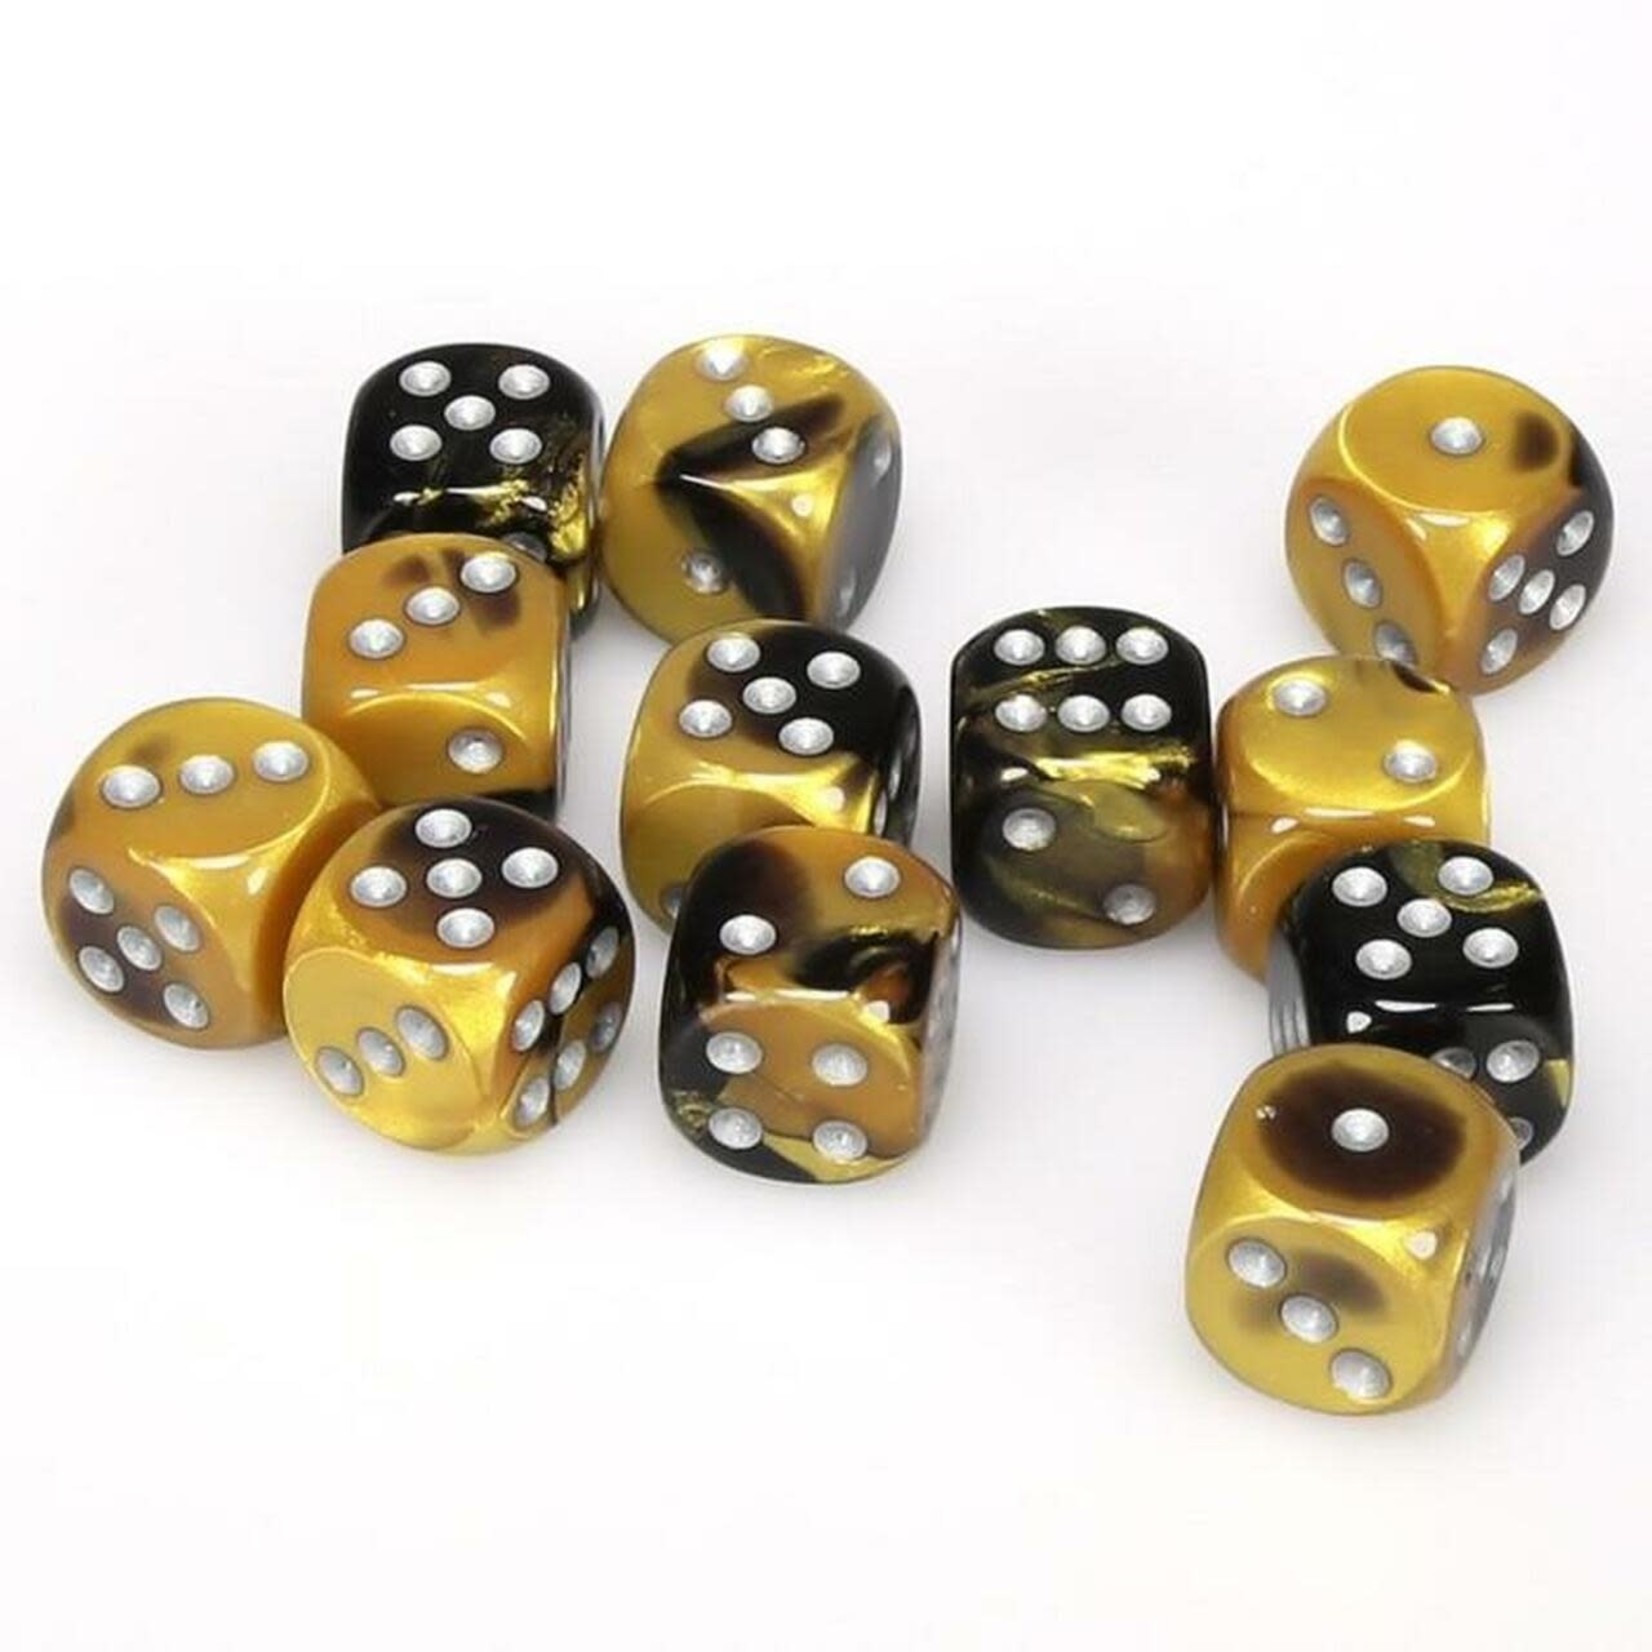 Chessex Chessex Gemini Black / Gold with Silver 16 mm d6 12 die set